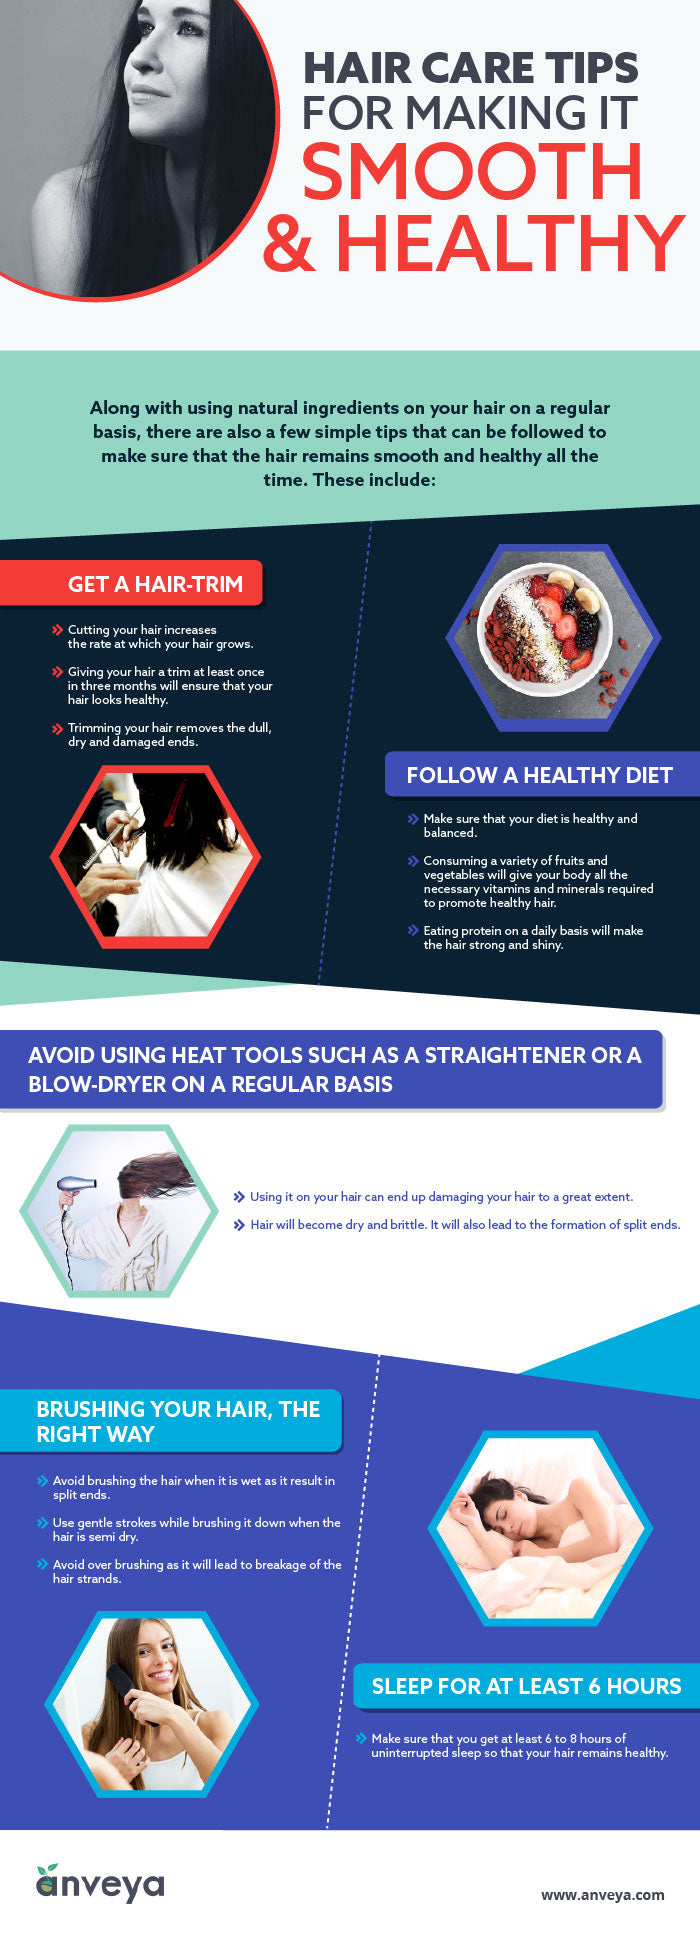 Hair Care Tips for Making it Smooth & Healthy (Infographic)